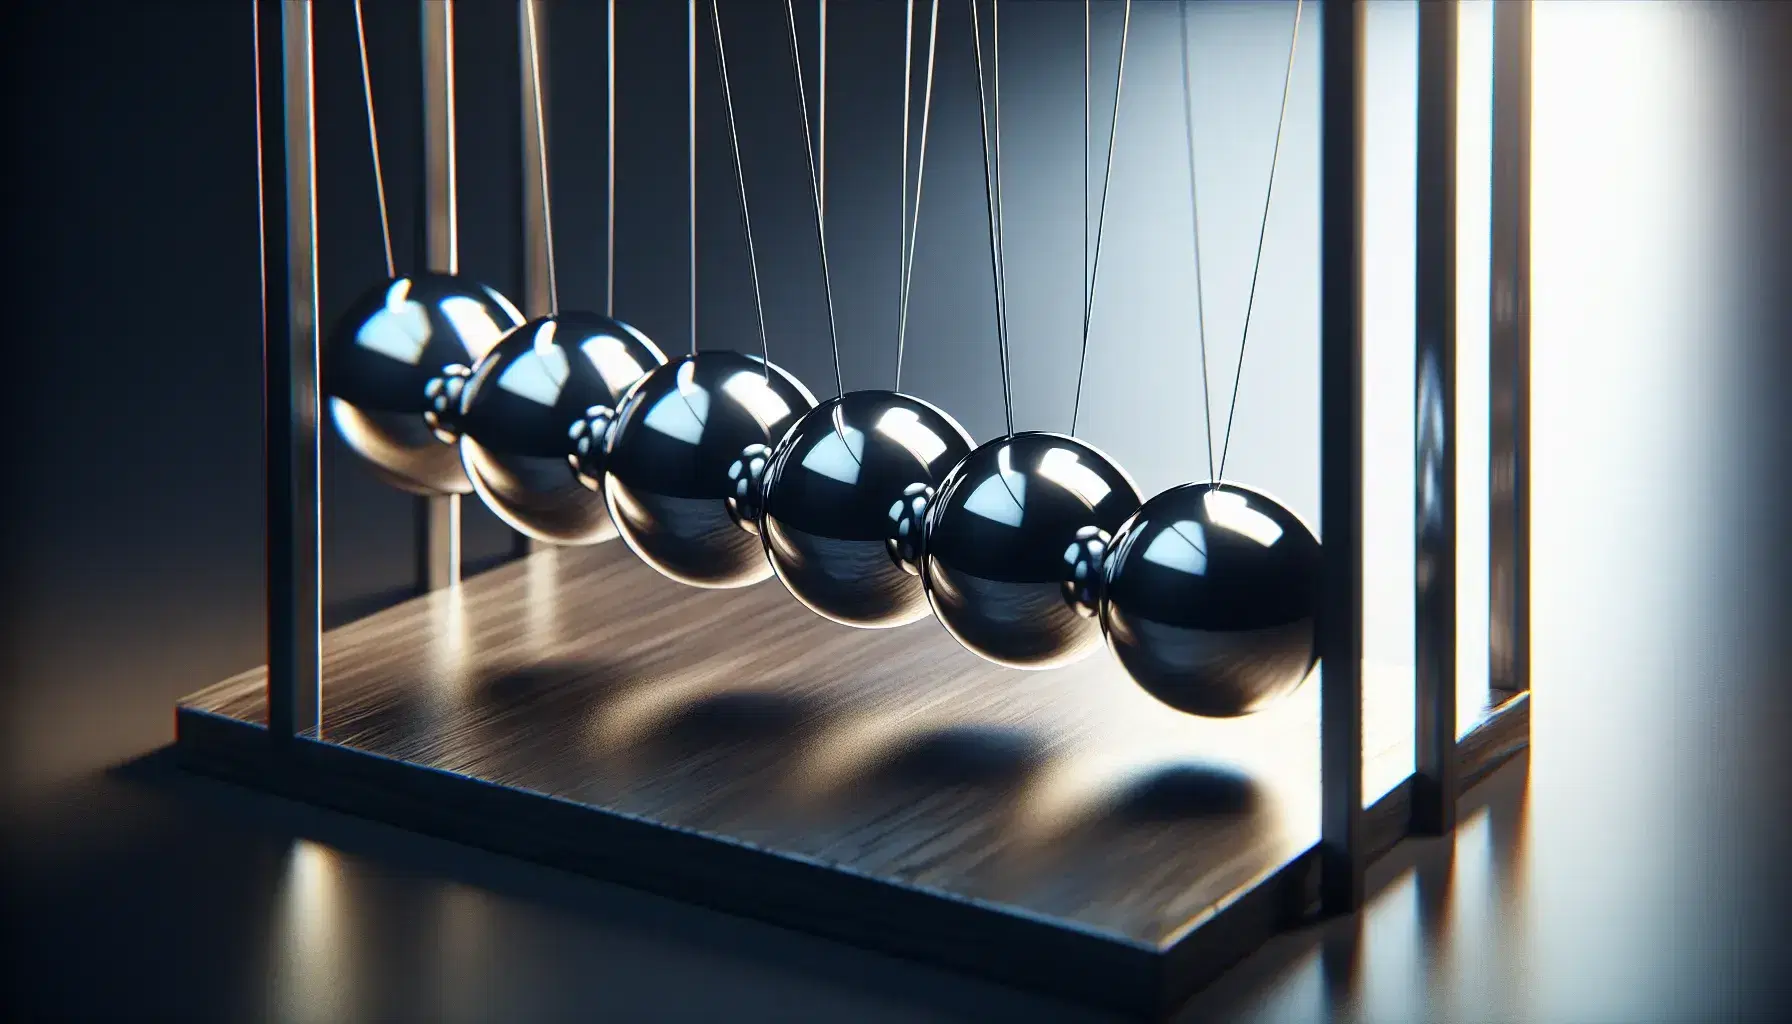 Newton's cradle with five polished metallic spheres aligned, one sphere poised to strike, on a gradient background, illustrating physics principles.